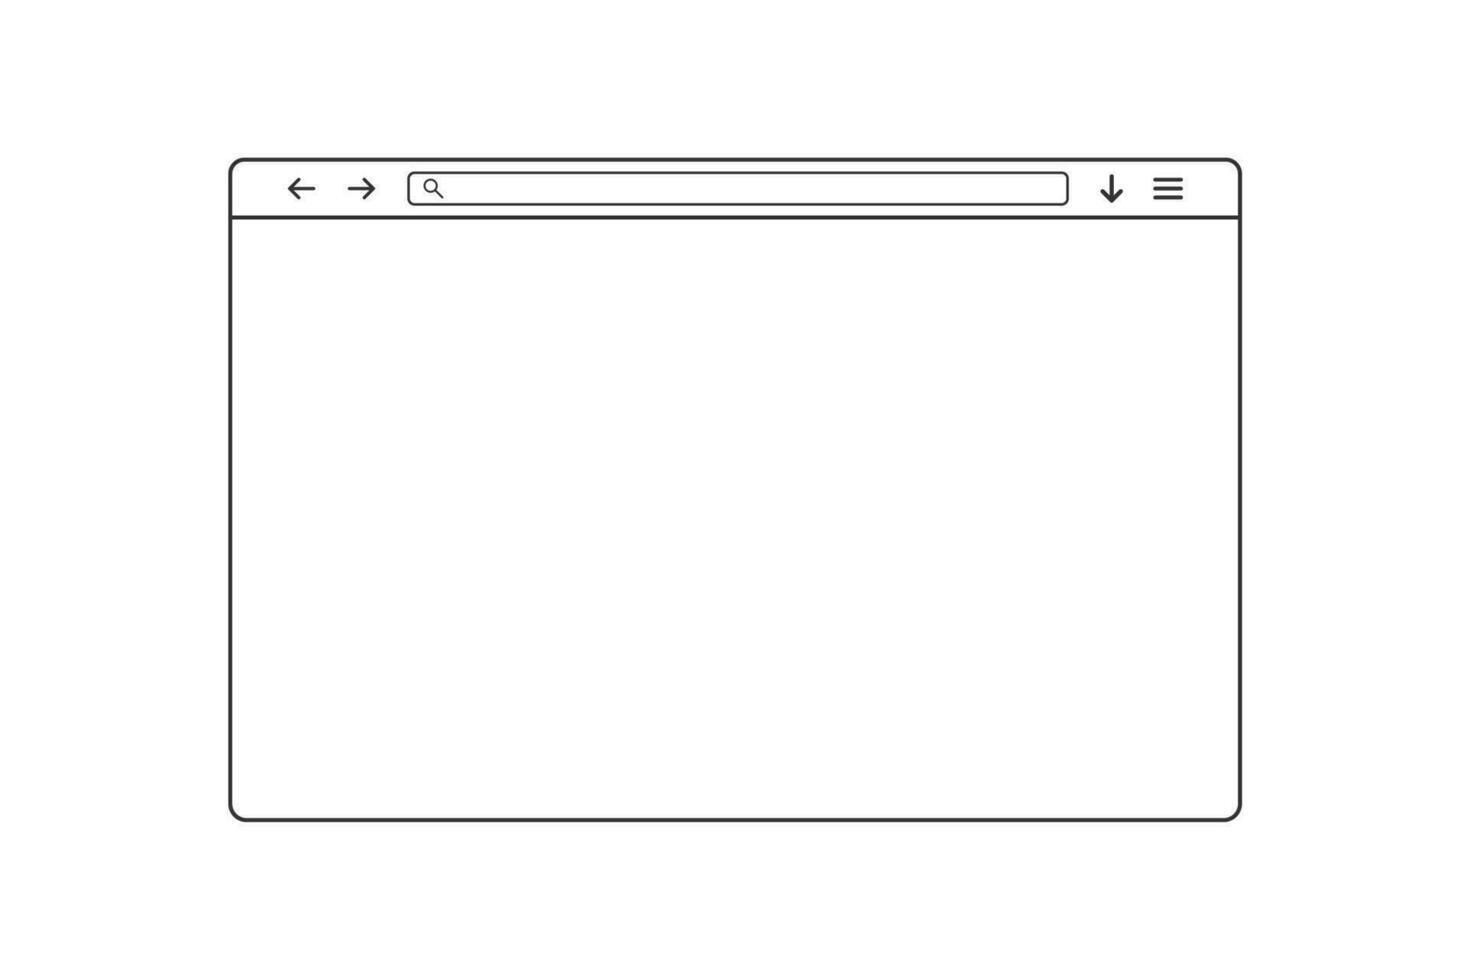 Web browser window. Simple outline web page. Browser template with search bar and loupe icon. Isolated website window on white background. Transparent web browser frame with address. EPS 10. vector